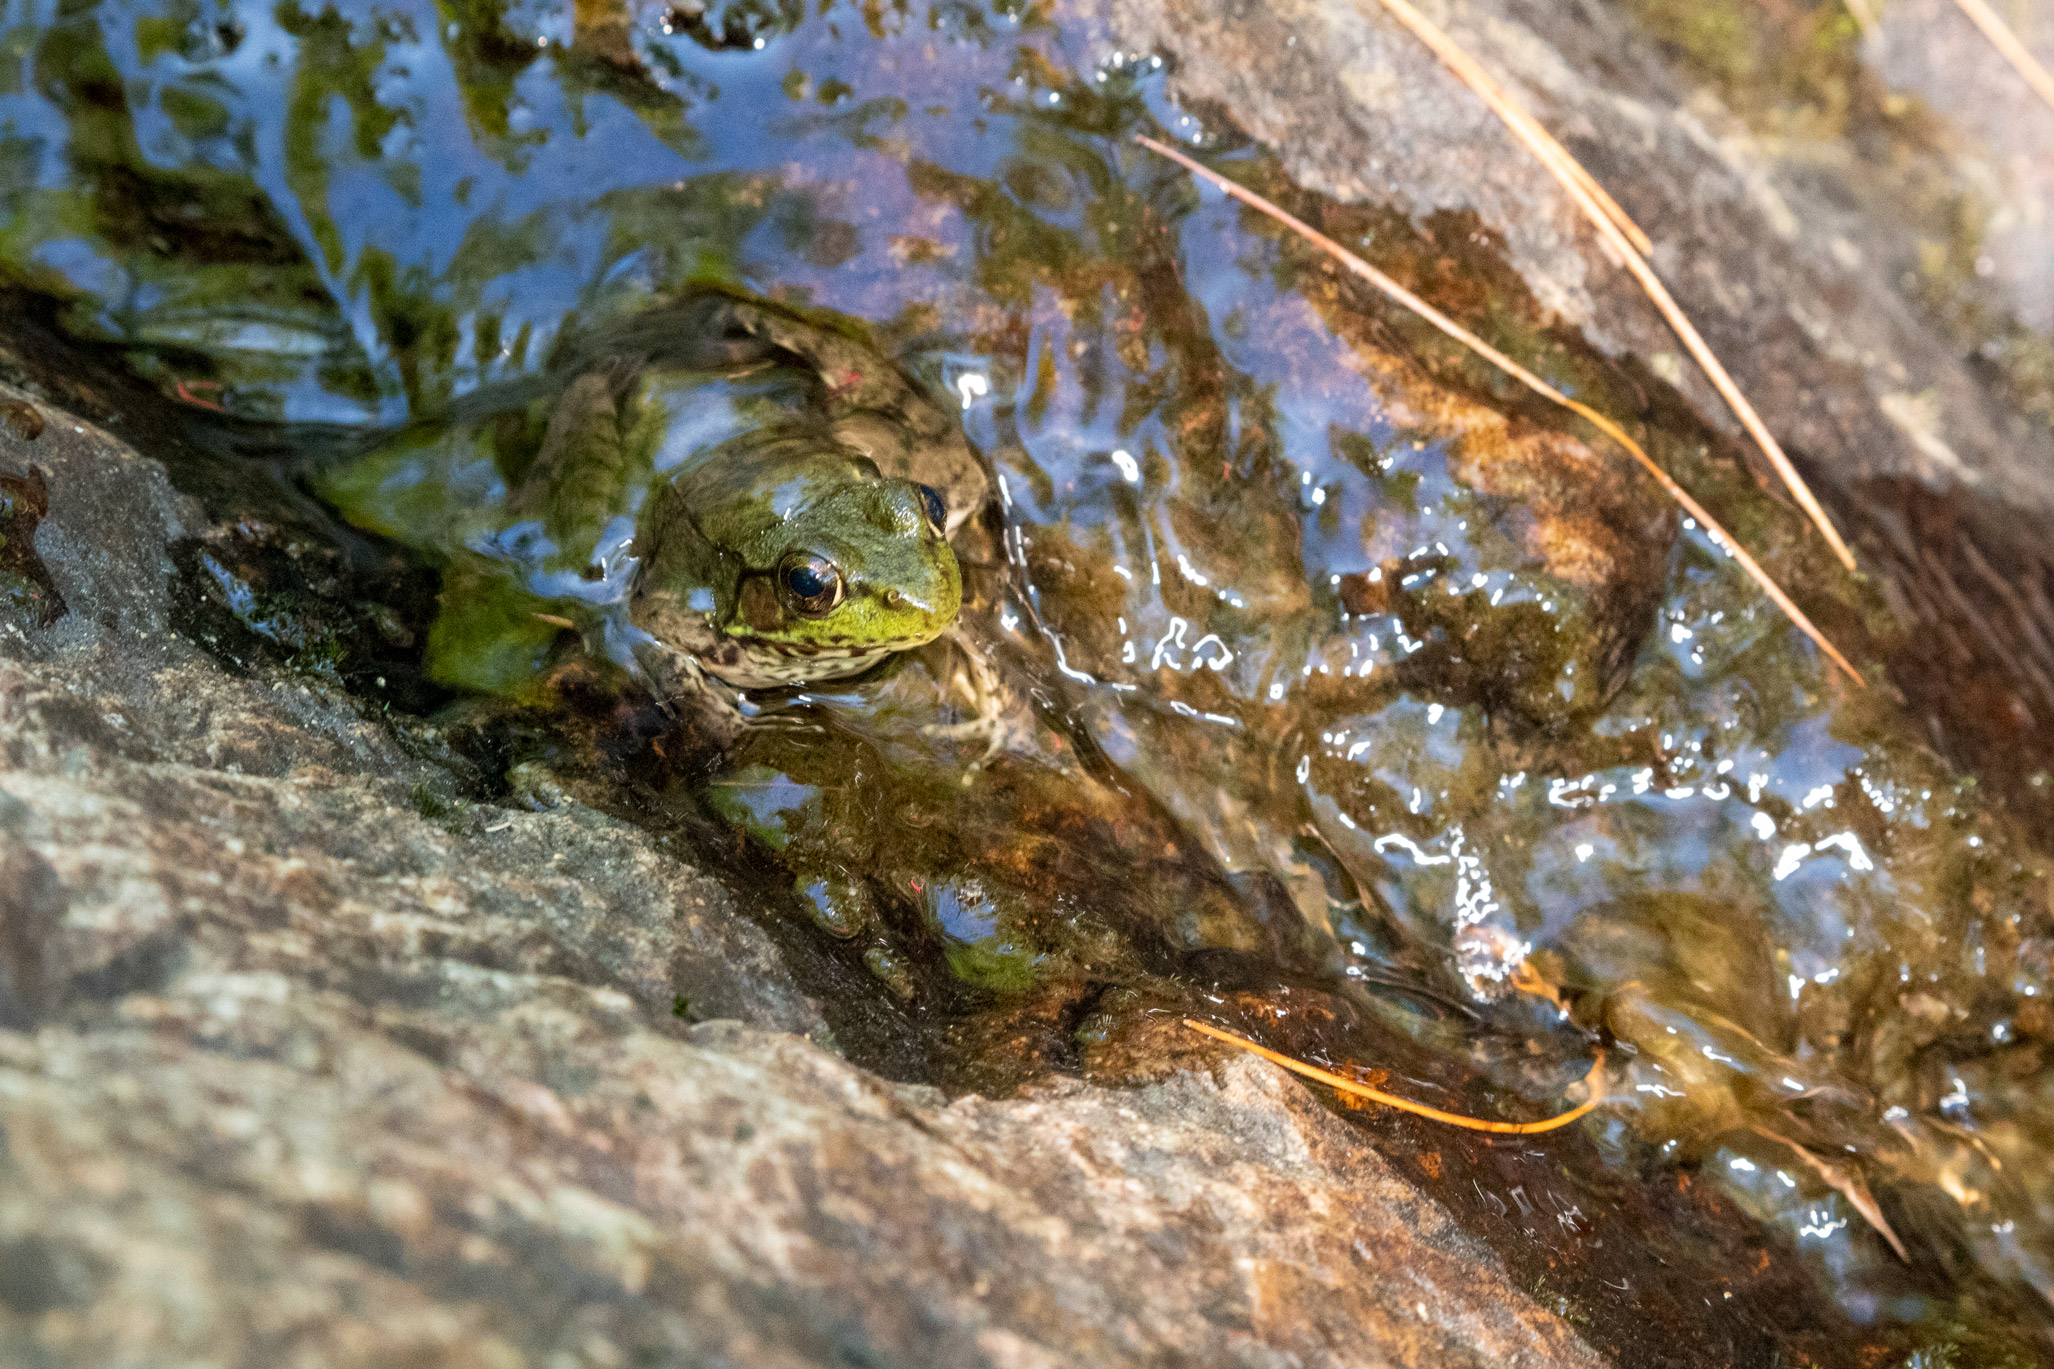 Frog sitting in shallow water